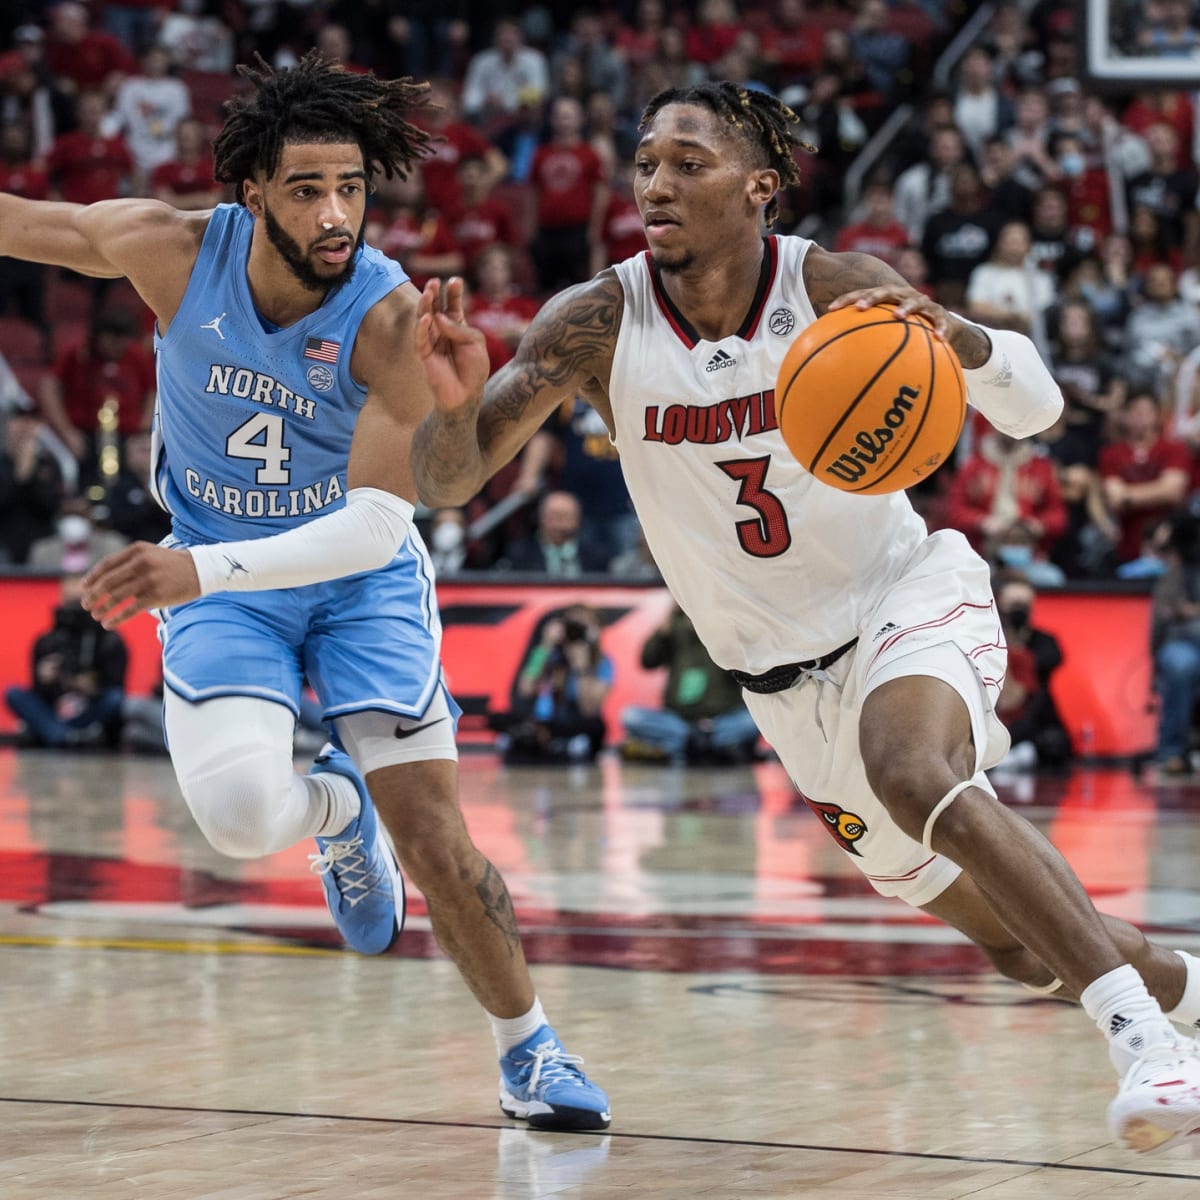 How to watch Louisville basketball vs. DePaul: Tip-off time and